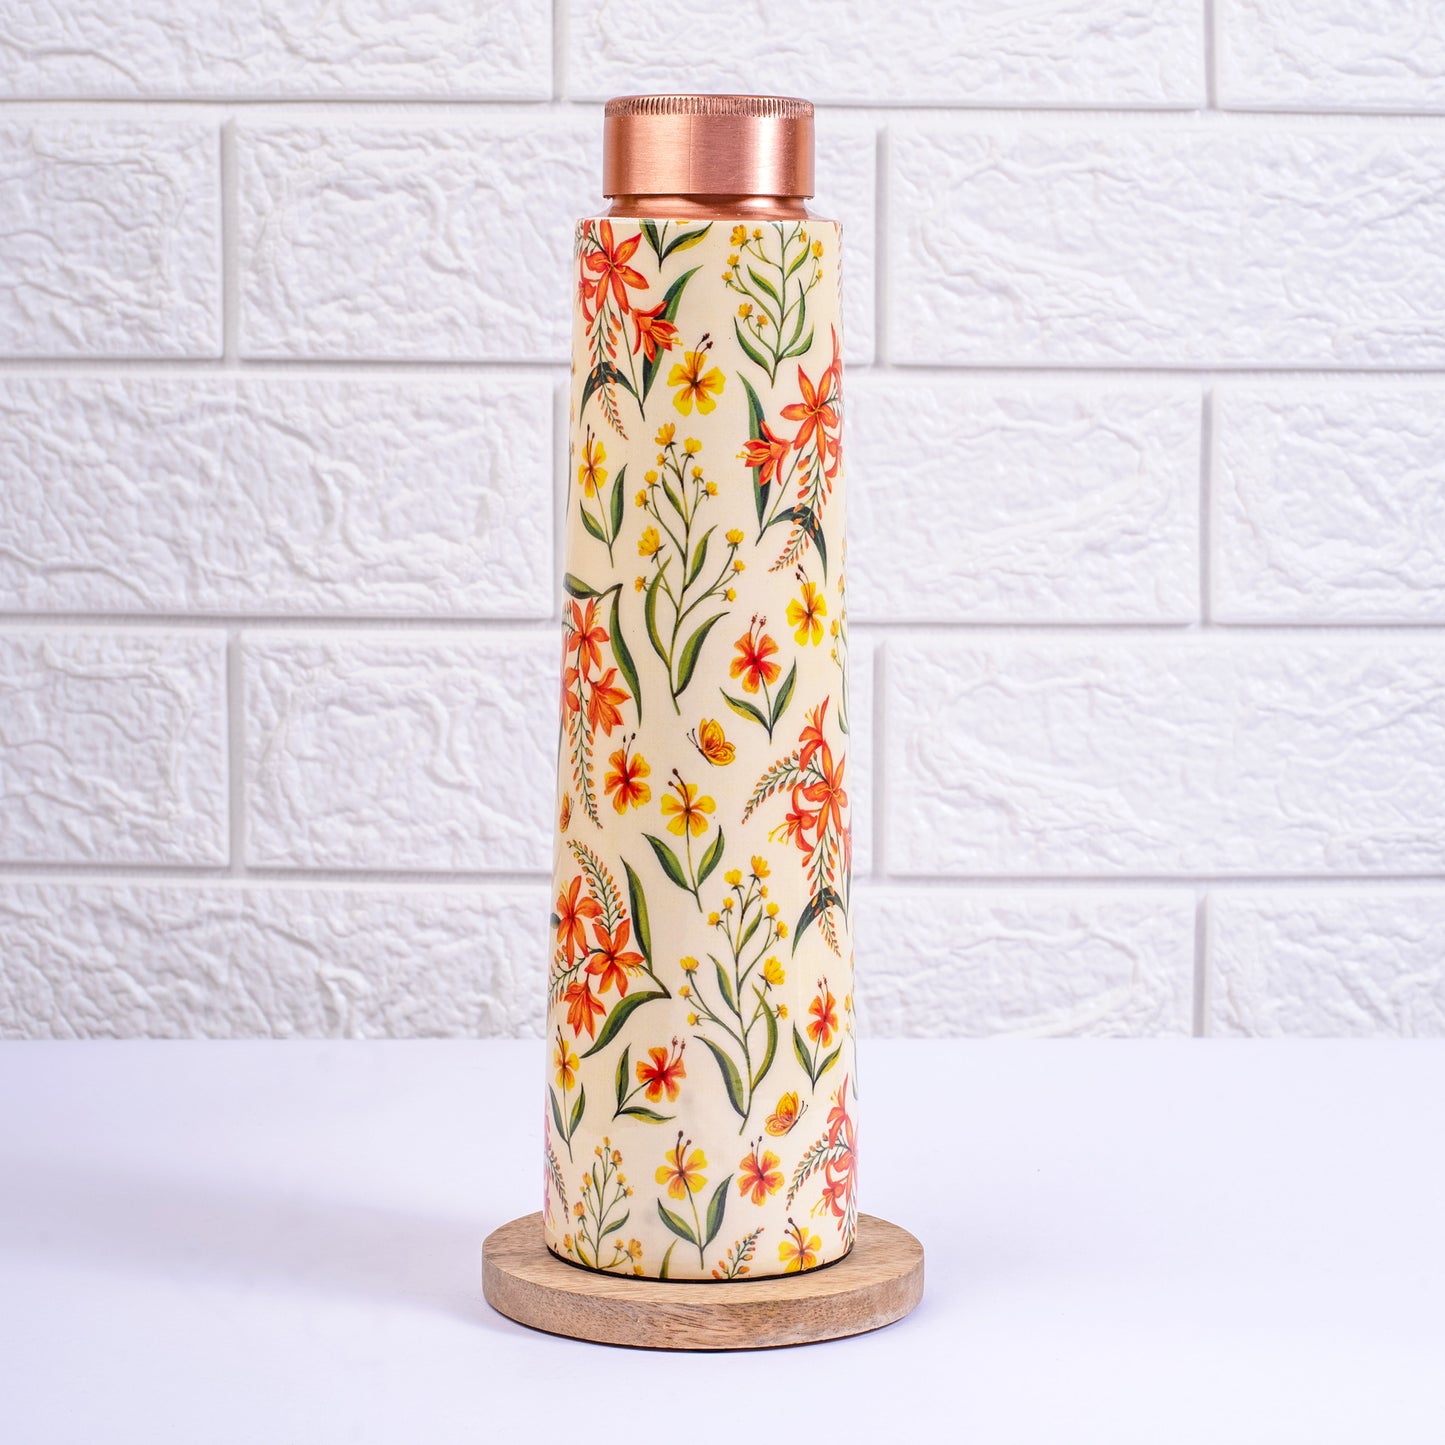 Summer Blossoms Copper Bottle and Tumblers - Gift Set